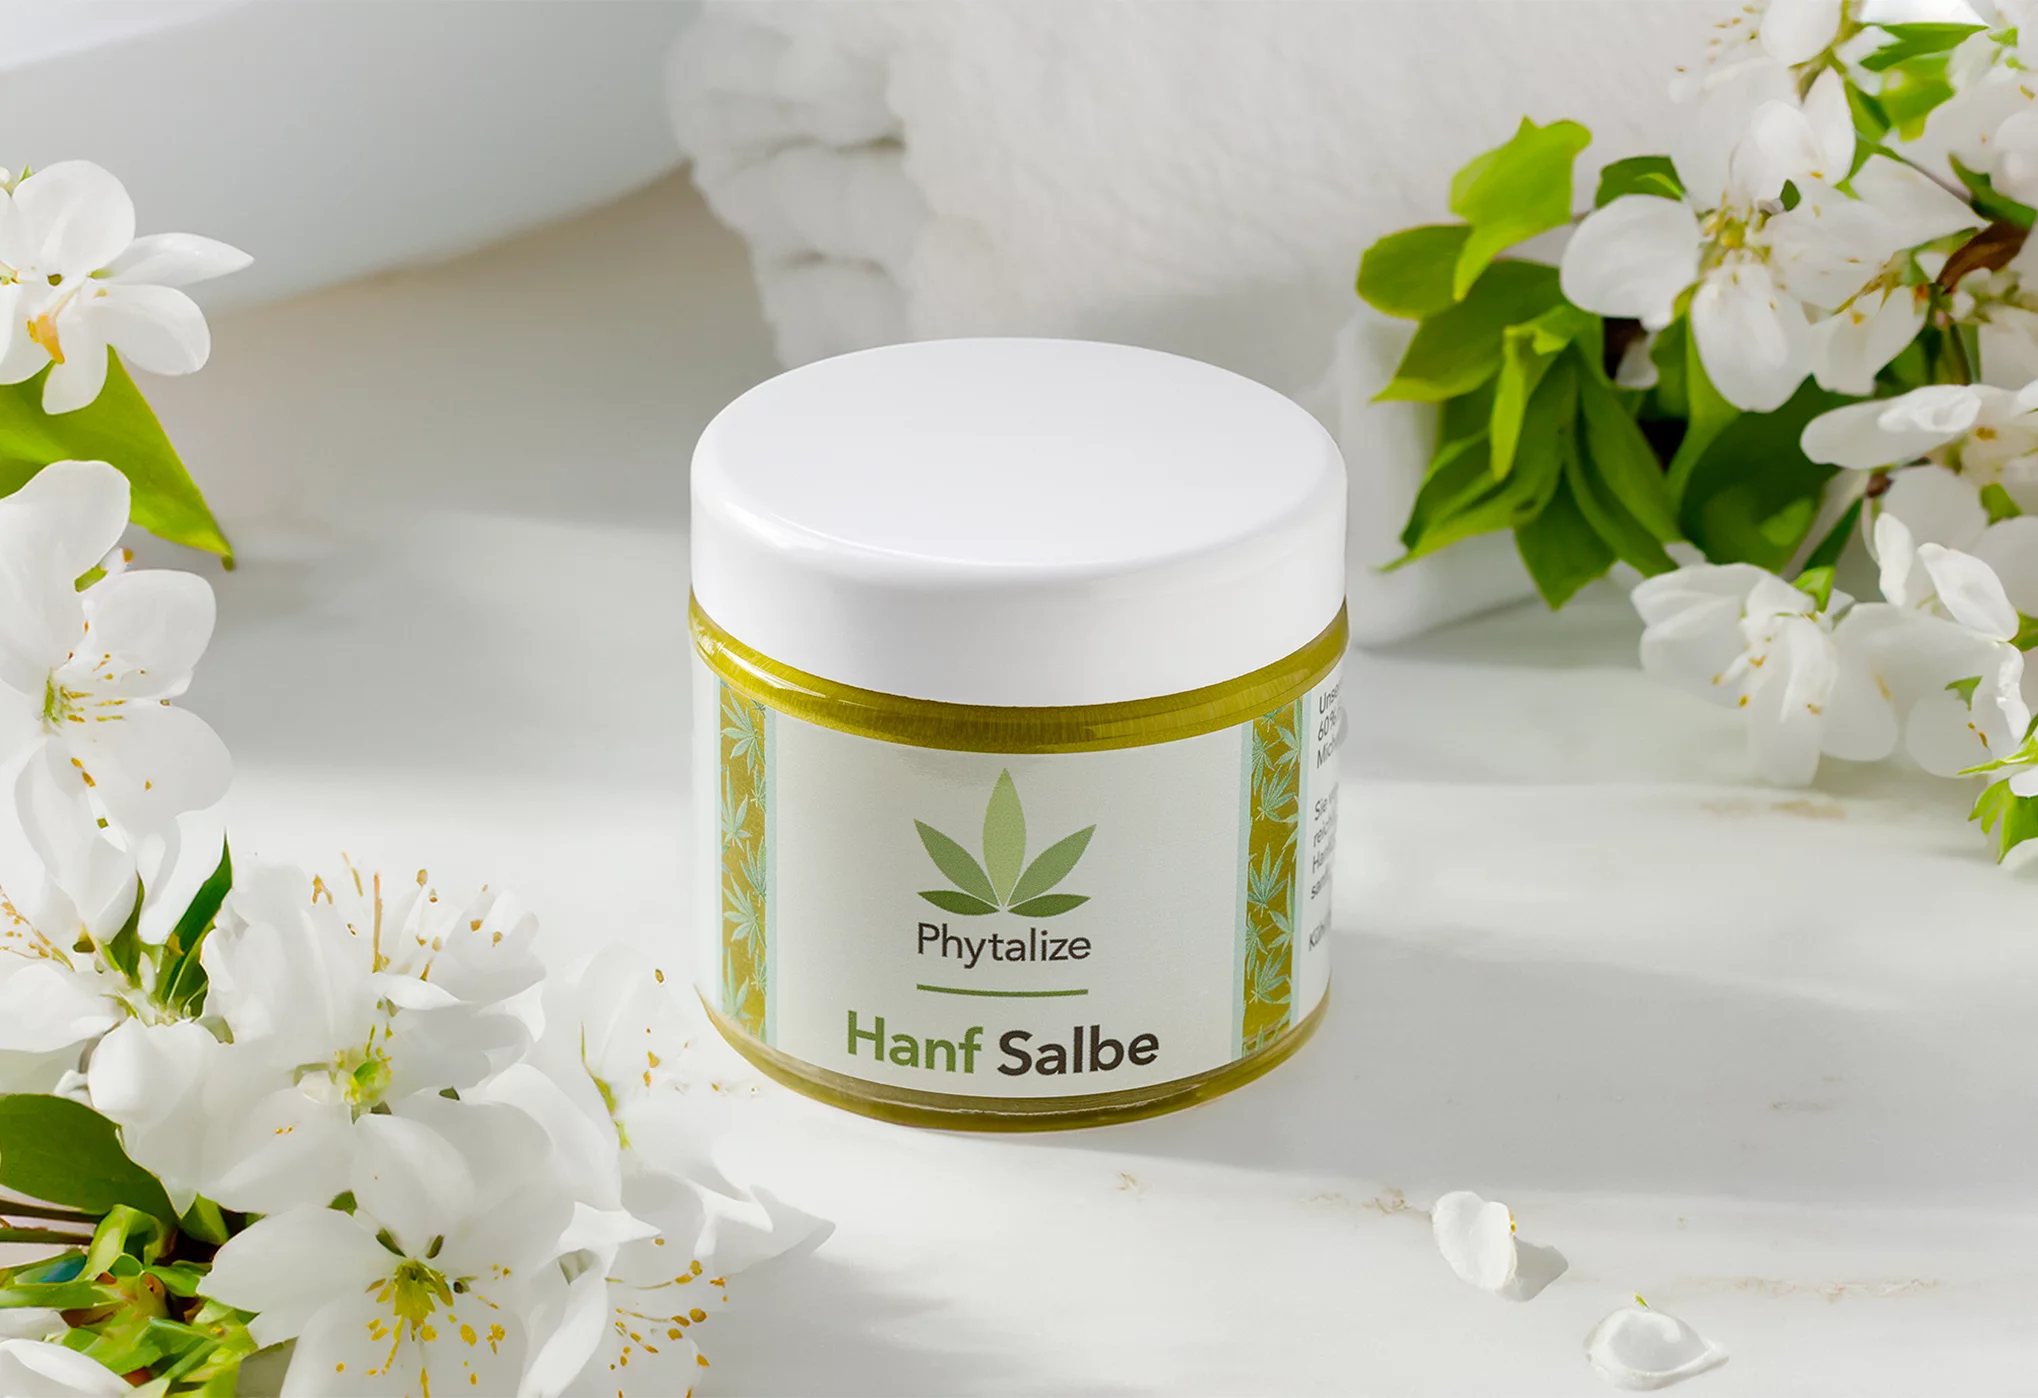 Back in stock!
Discover our rich, nourishing ointment with 60 % hemp oil now! It pampers stressed, dry skin and gives it a particularly supple feel. Now available in a new design under the brand name Phytalize!